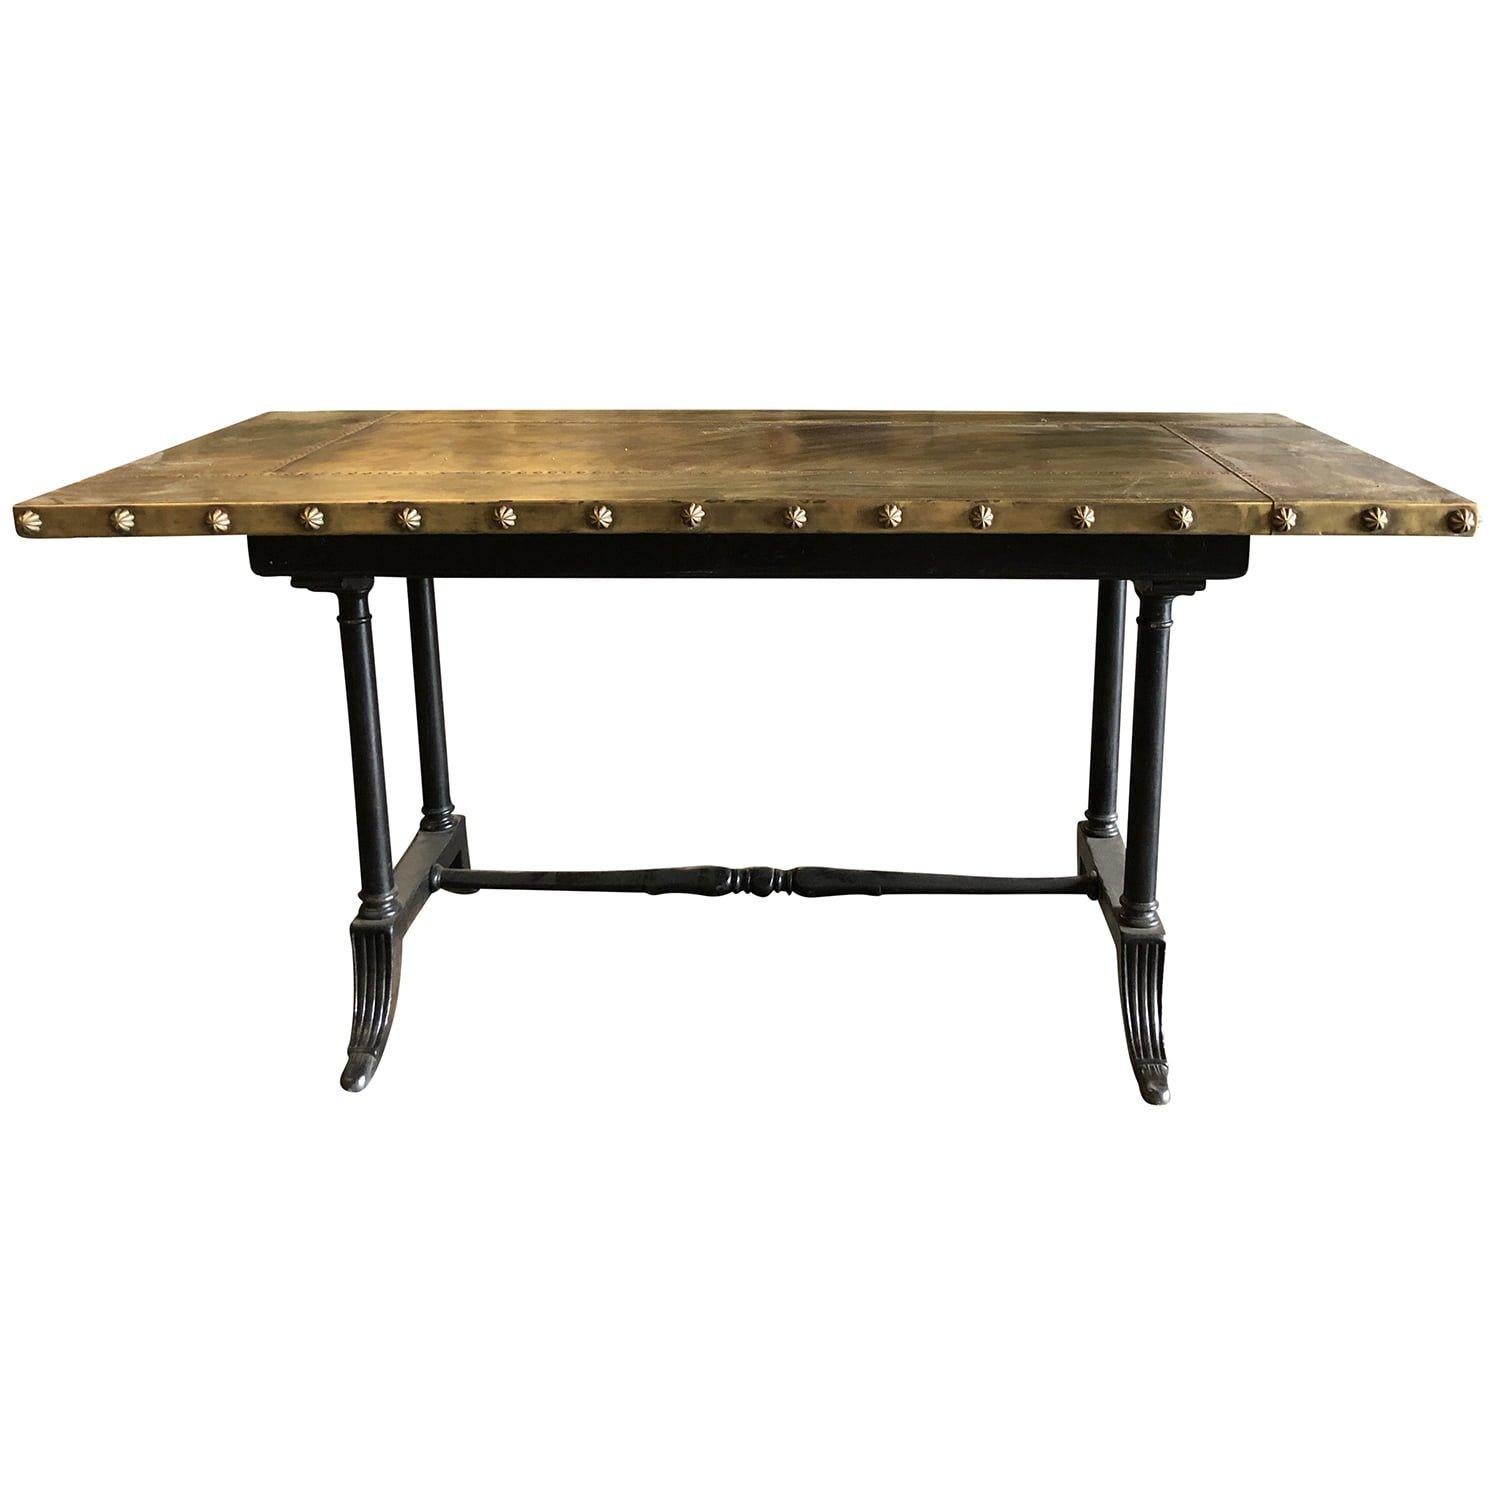 Early 20 century, a vintage Belgian Art Deco metal work table with hand crafted copper top and riveted border, in good condition. Aged patina, with a strong industrial aesthetic. The four legs uniquely shaped providing stability to the work surface.